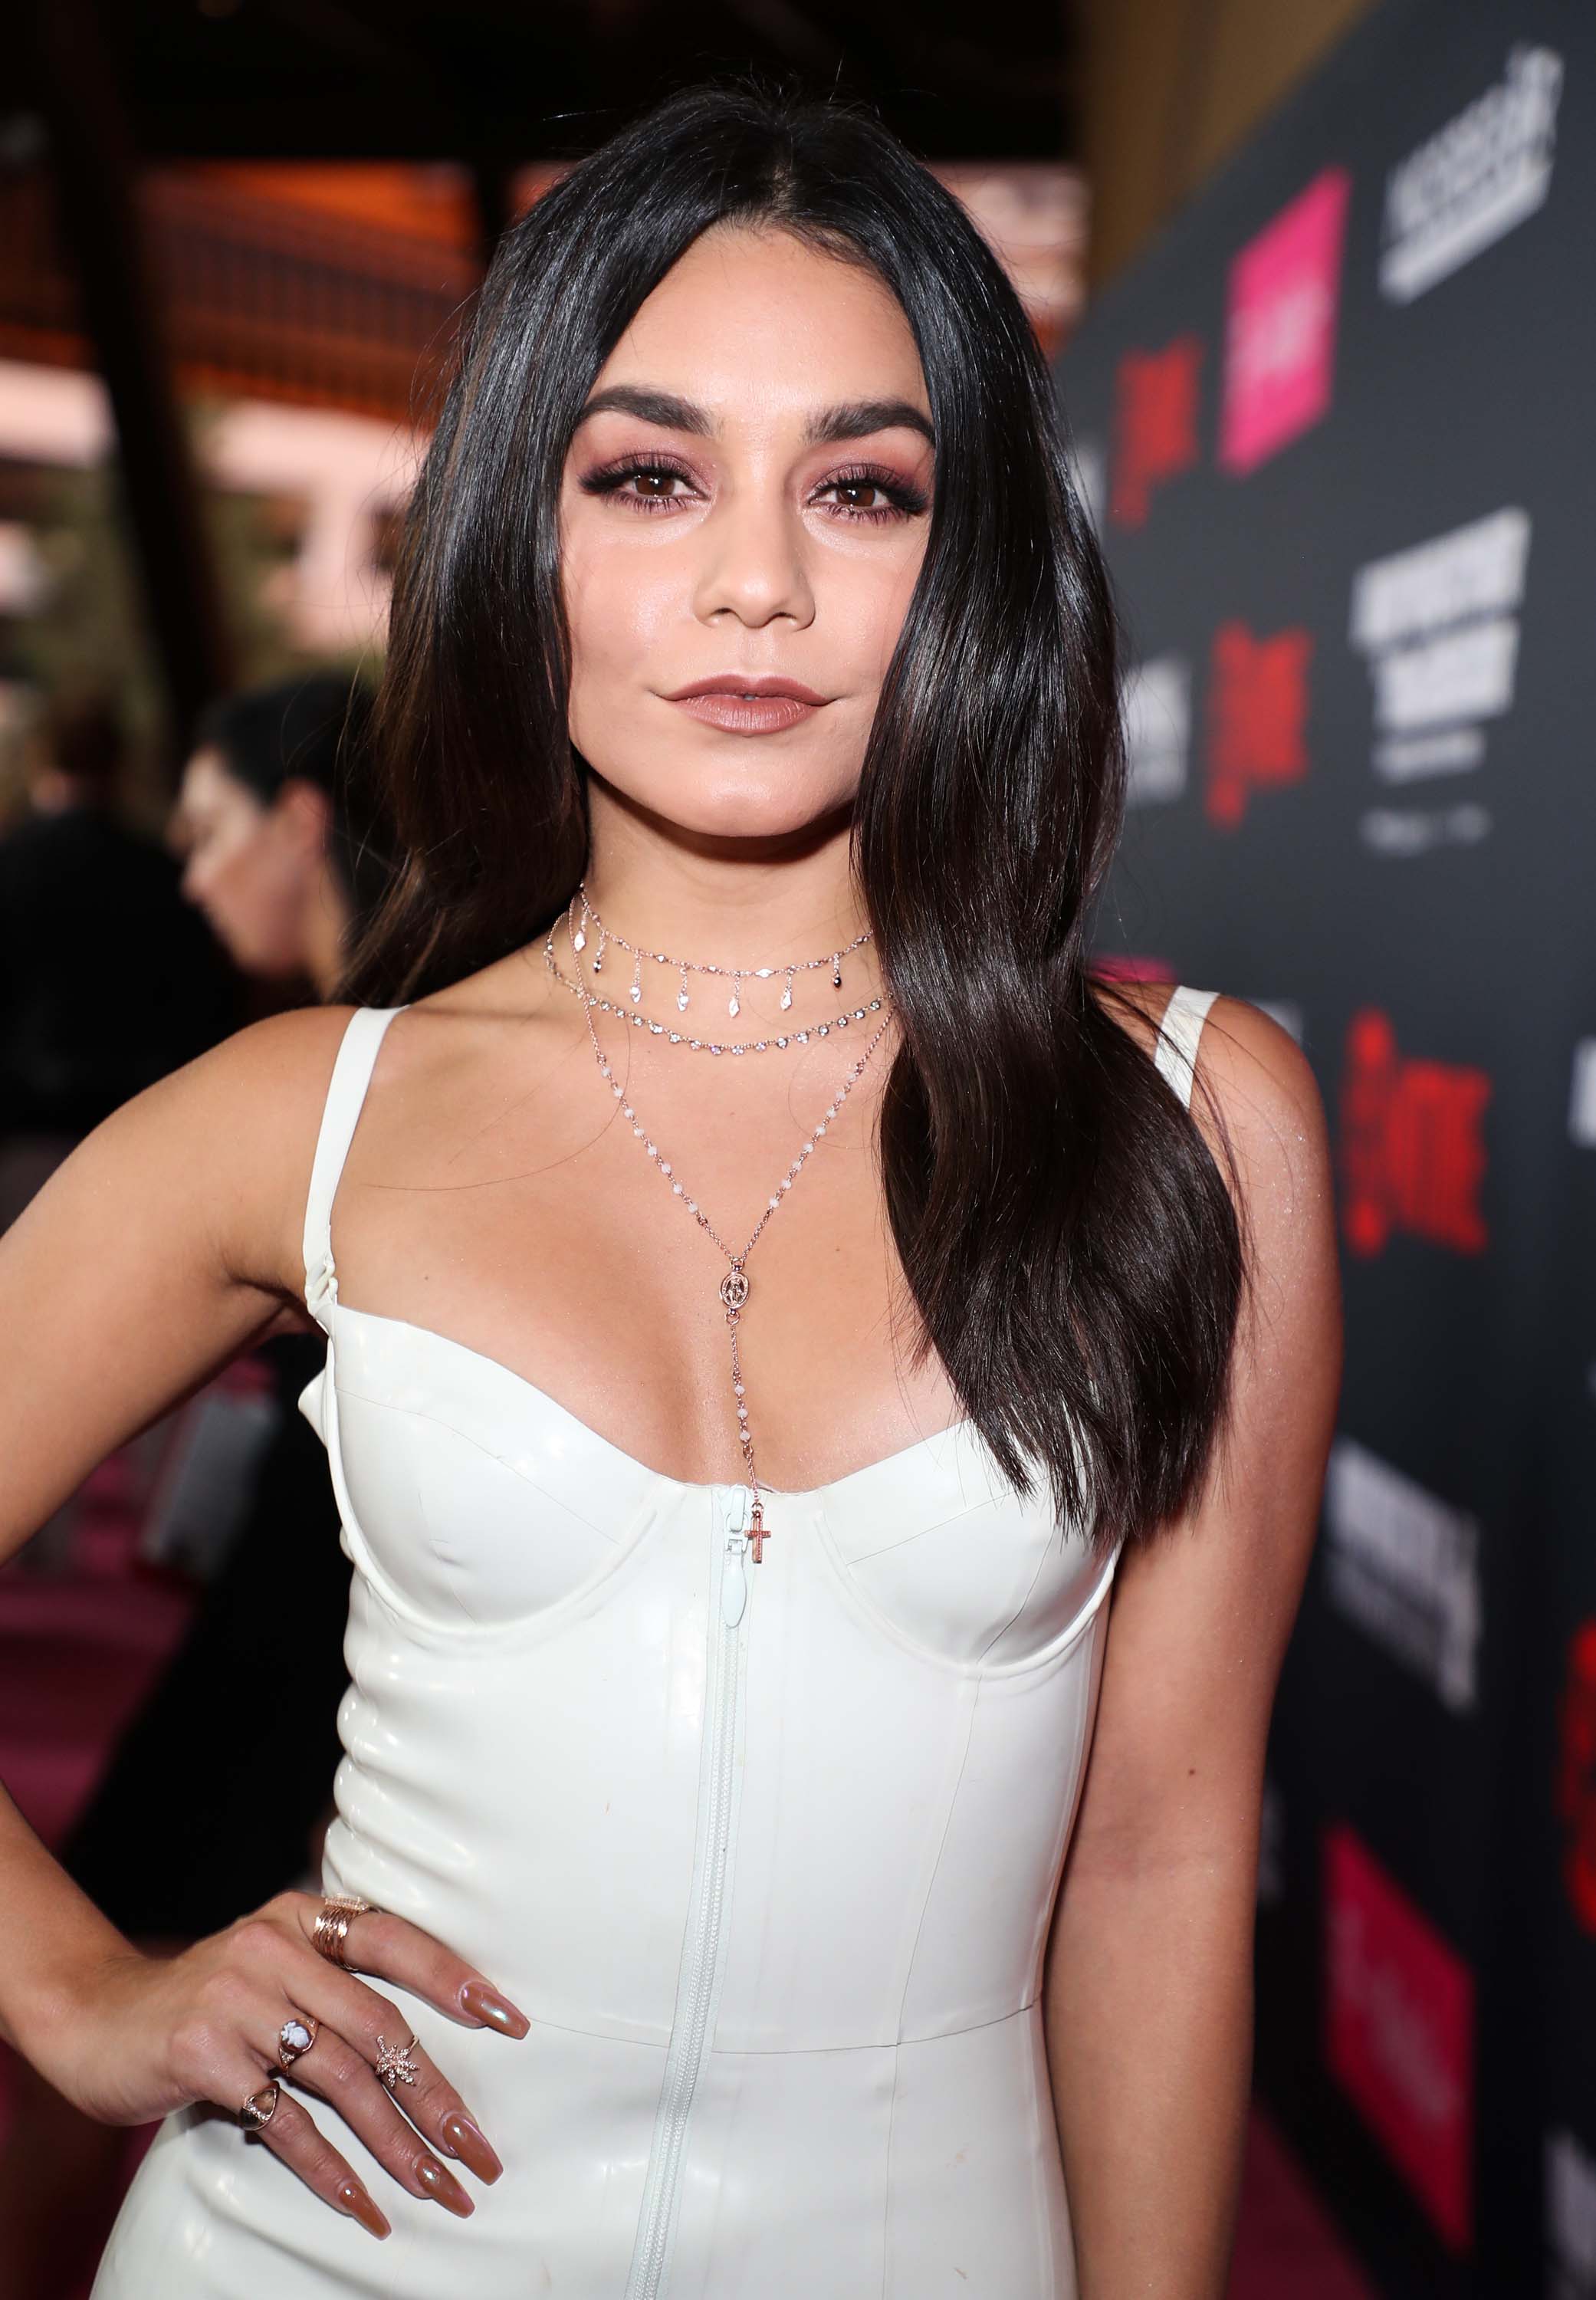 Vanessa Hudgens attends Showtime, WME IME & Mayweather Promotions VIP PreFight party